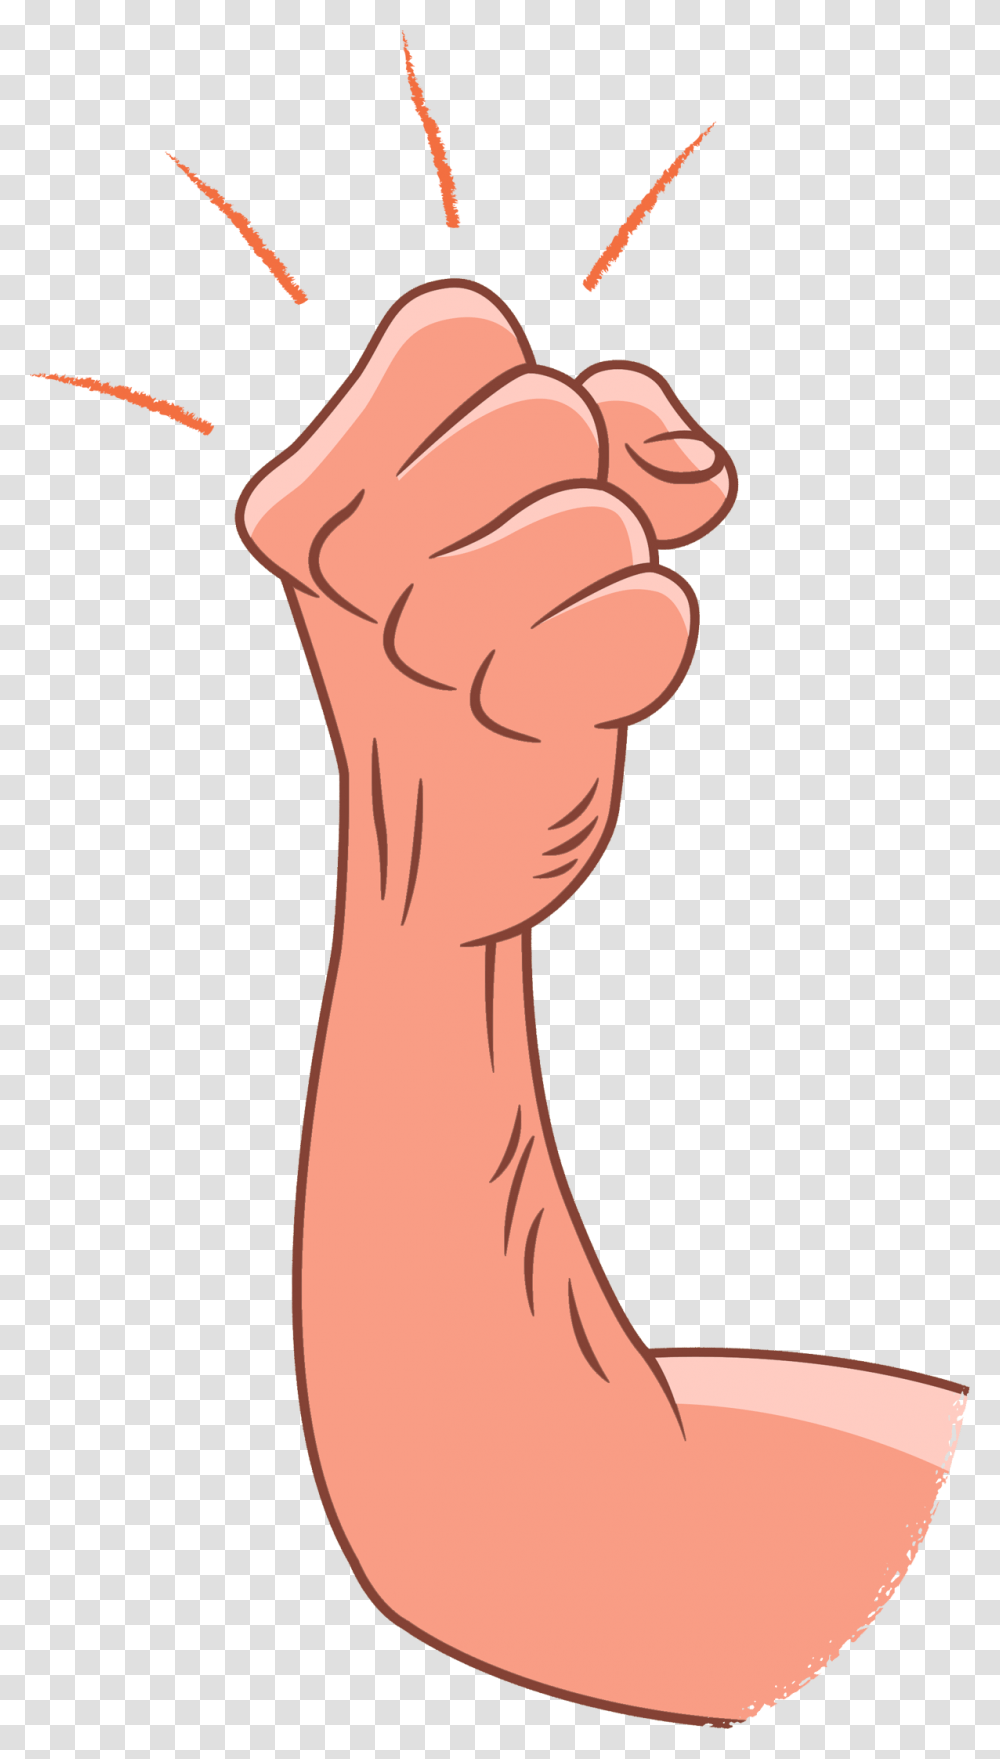 Fist Shaking Gif Background, Hand, Wrist Transparent Png